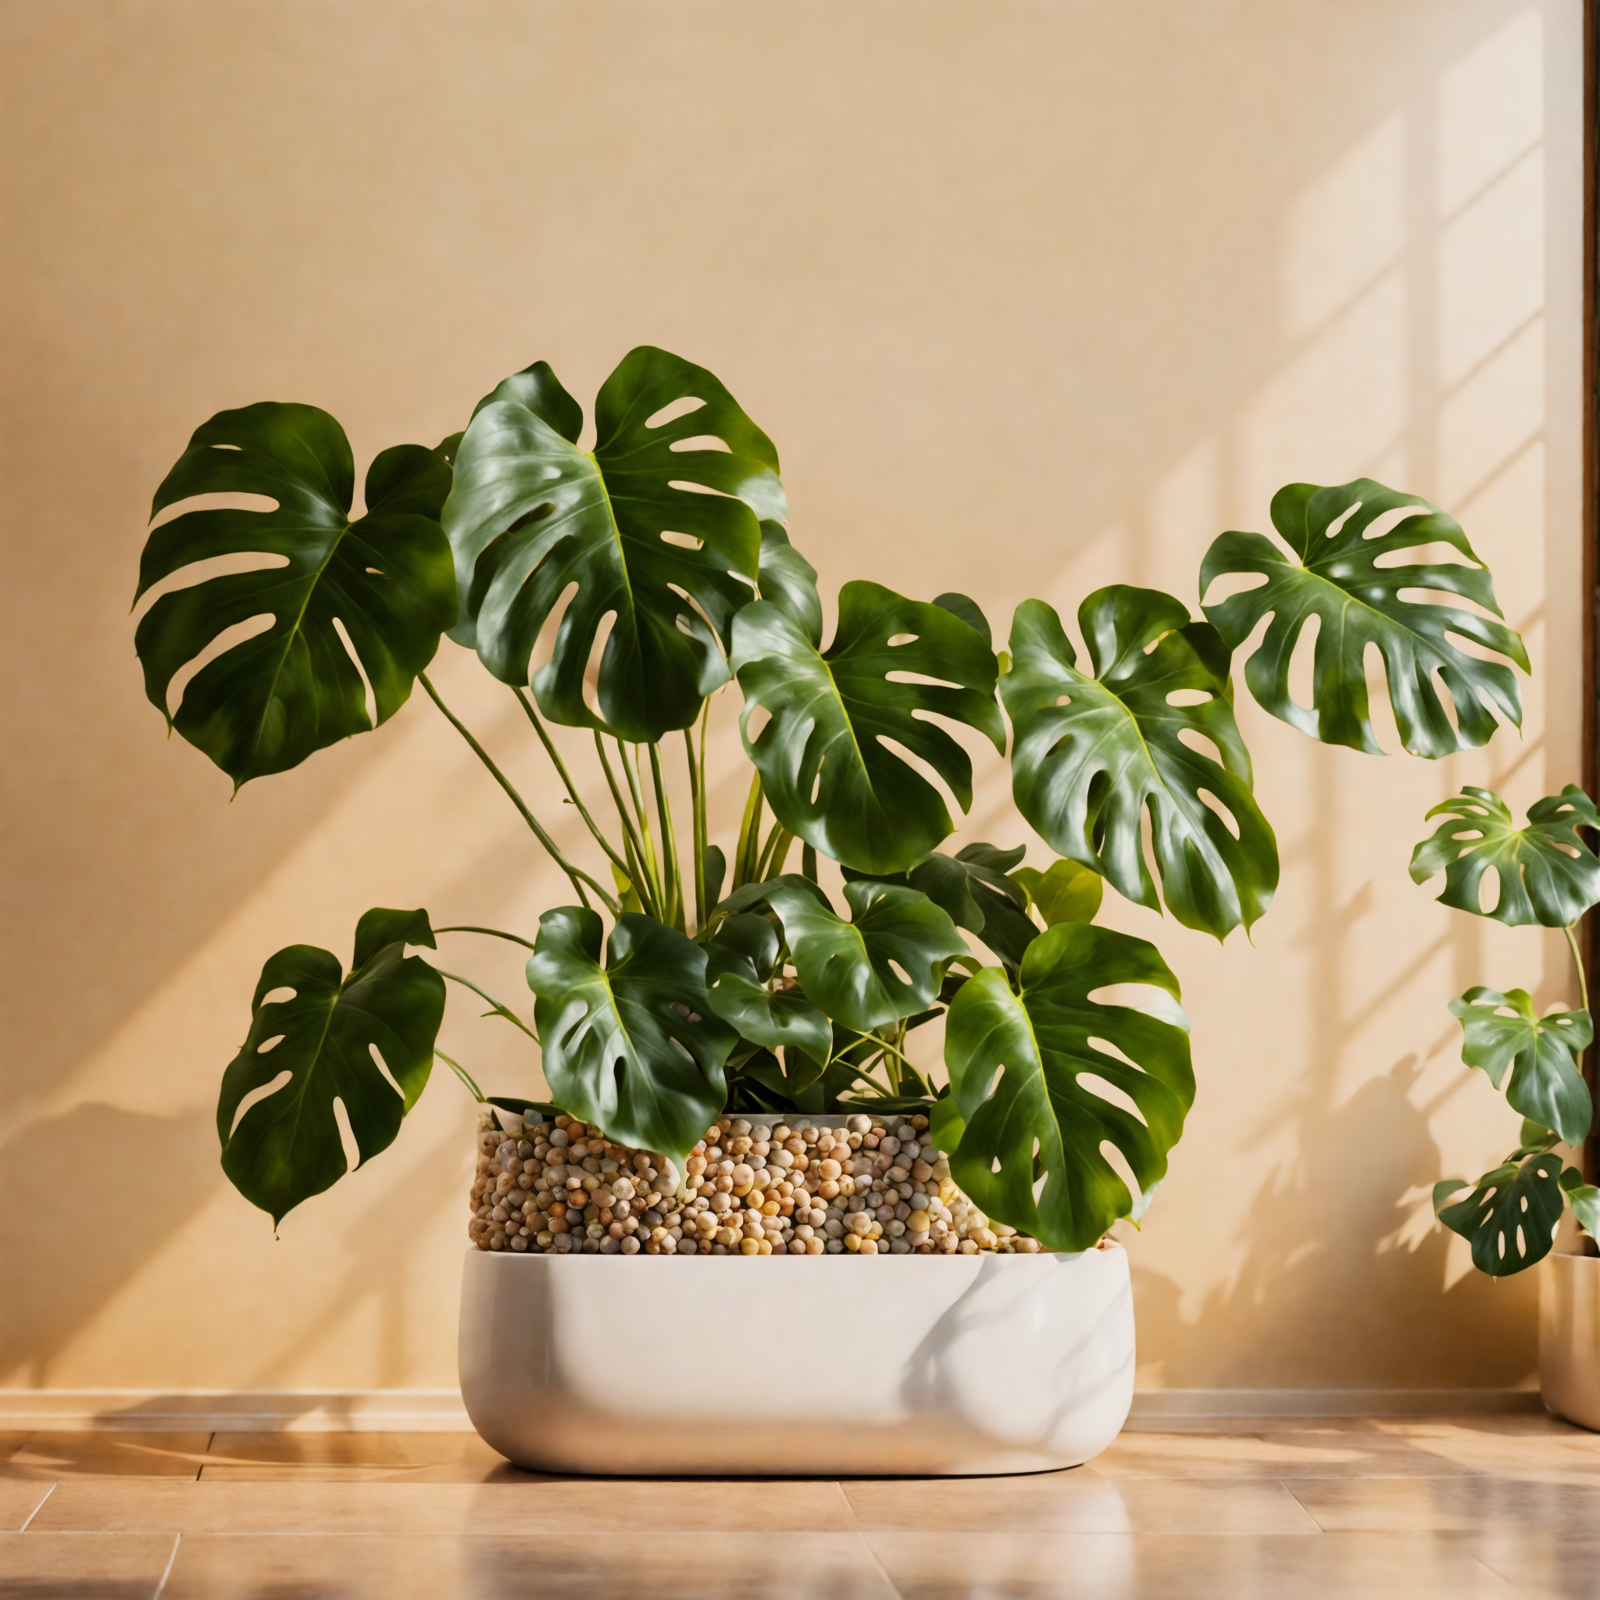 Monstera deliciosa in a planter on a counter, with clear lighting and neutral decor.